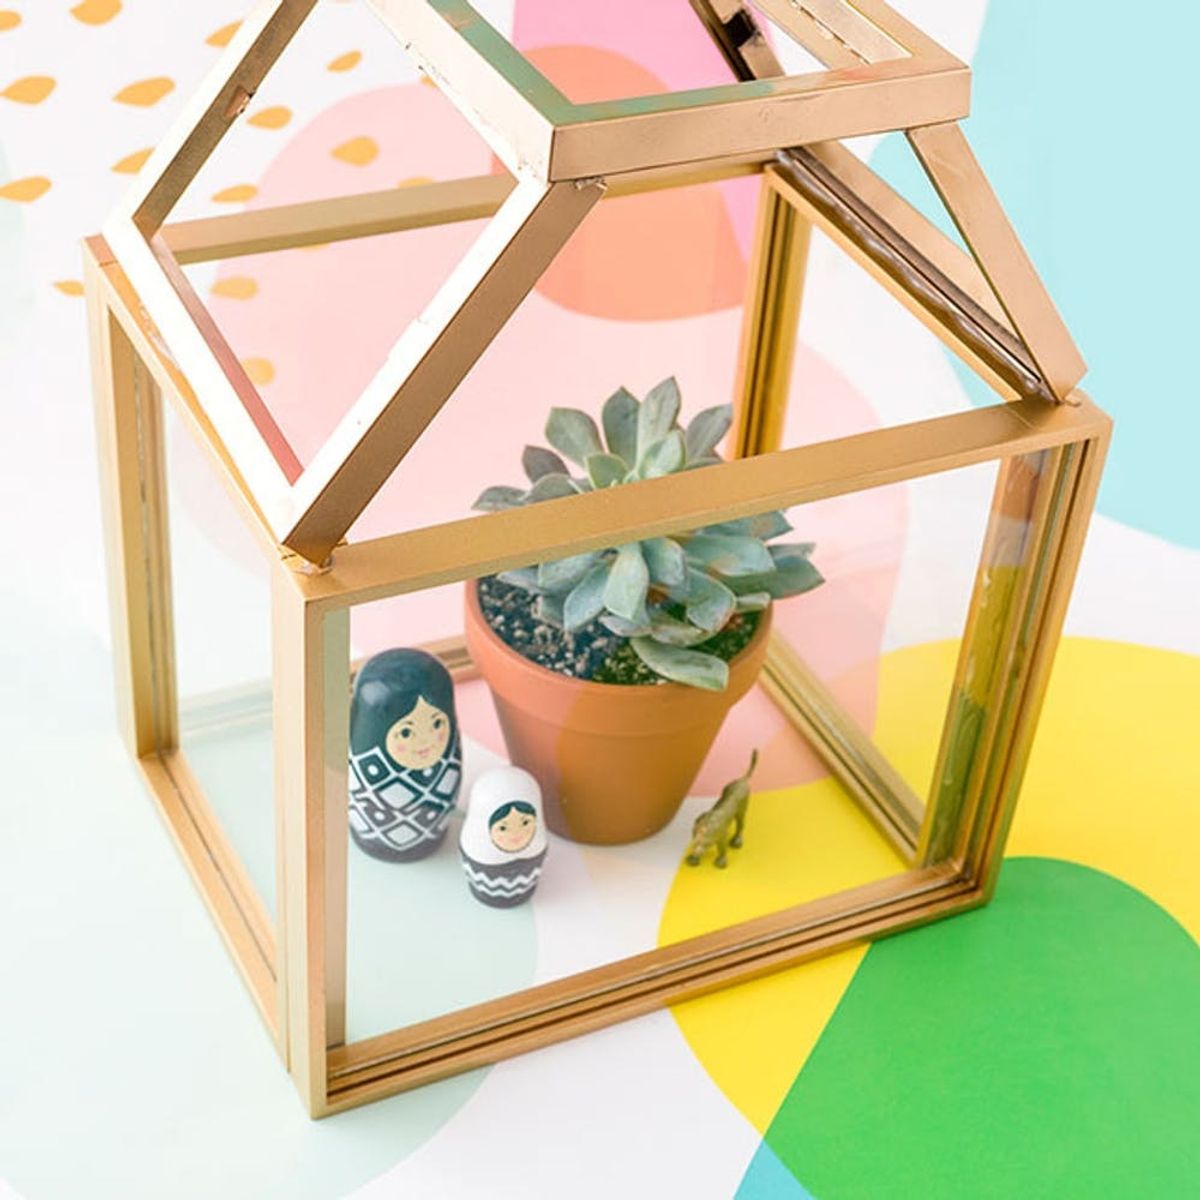 You’ll Never Believe What We Used to Build This Terrarium